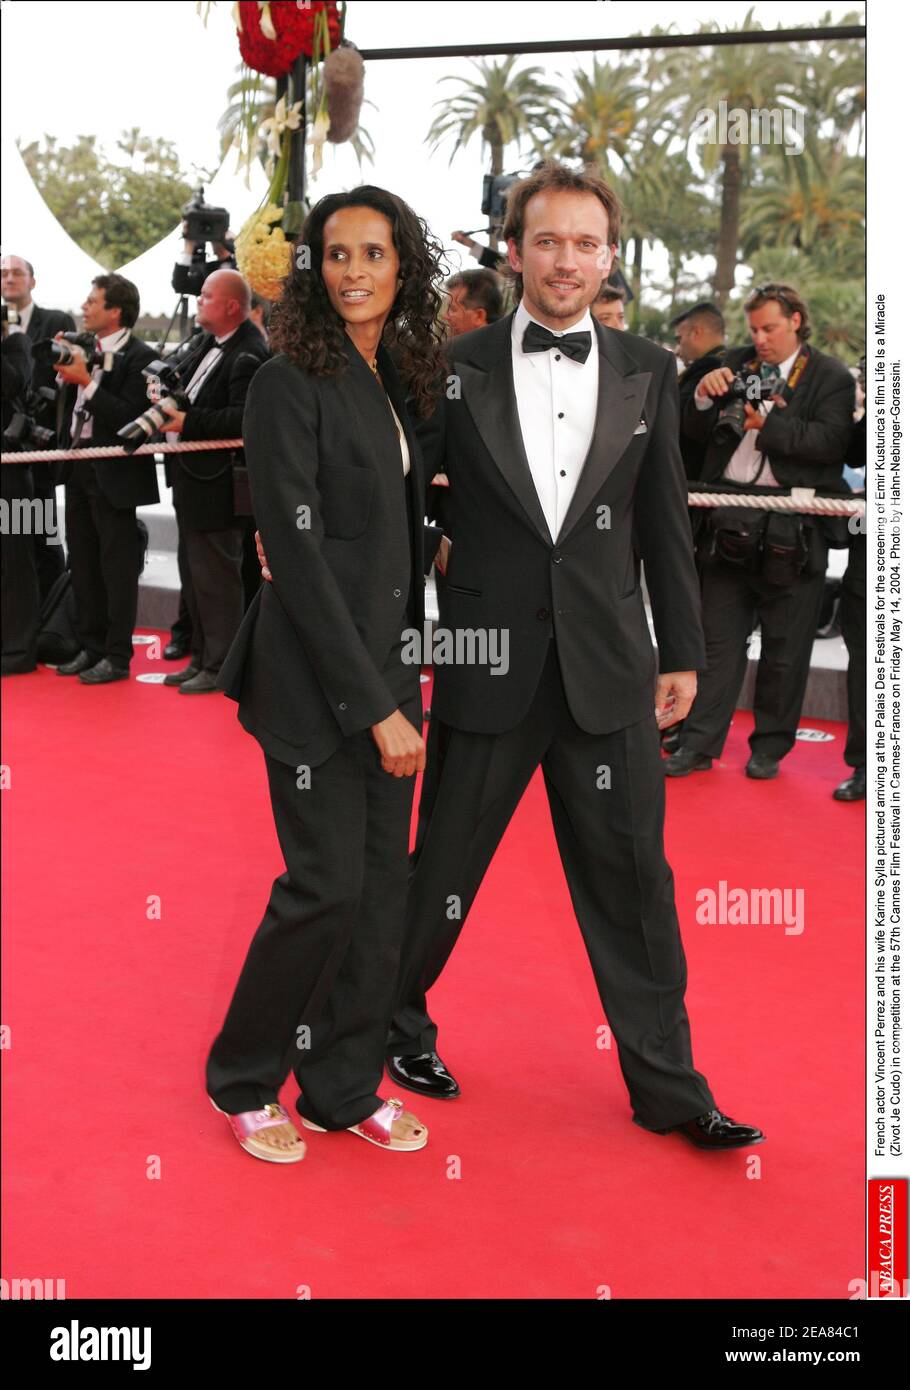 Swiss actor Vincent Perez and his wife Karine Sylla pictured arriving at the Palais Des Festivals for the screening of Emir Kusturica's film Life Is a Miracle (Zivot Je Cudo) in competition at the 57th Cannes Film Festival in Cannes-France on Friday May 14, 2004. Photo by Hahn-Nebinger-Gorassini. Stock Photo